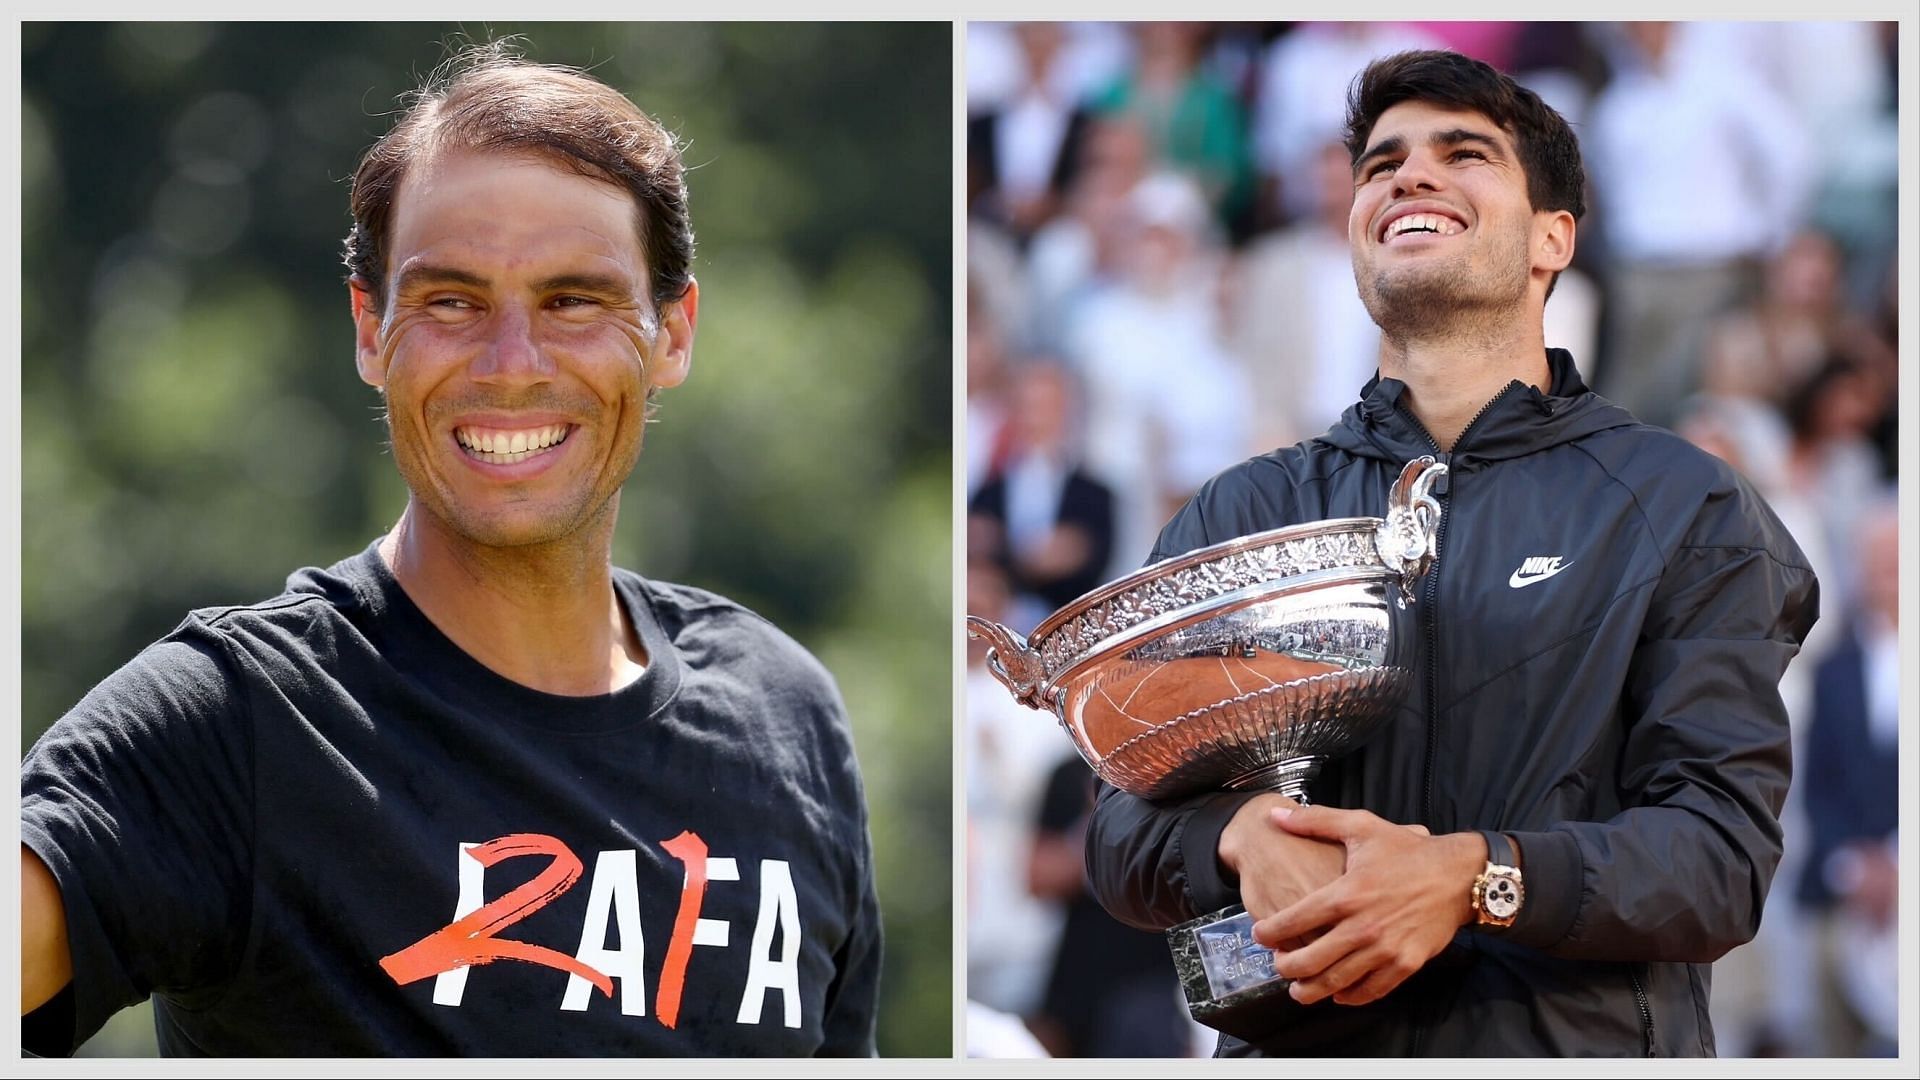 Carlos Alcaraz's popularity rises after French Open; becomes sixth tennis player to cross 5 million followers on Instagram, with Rafael Nadal leading